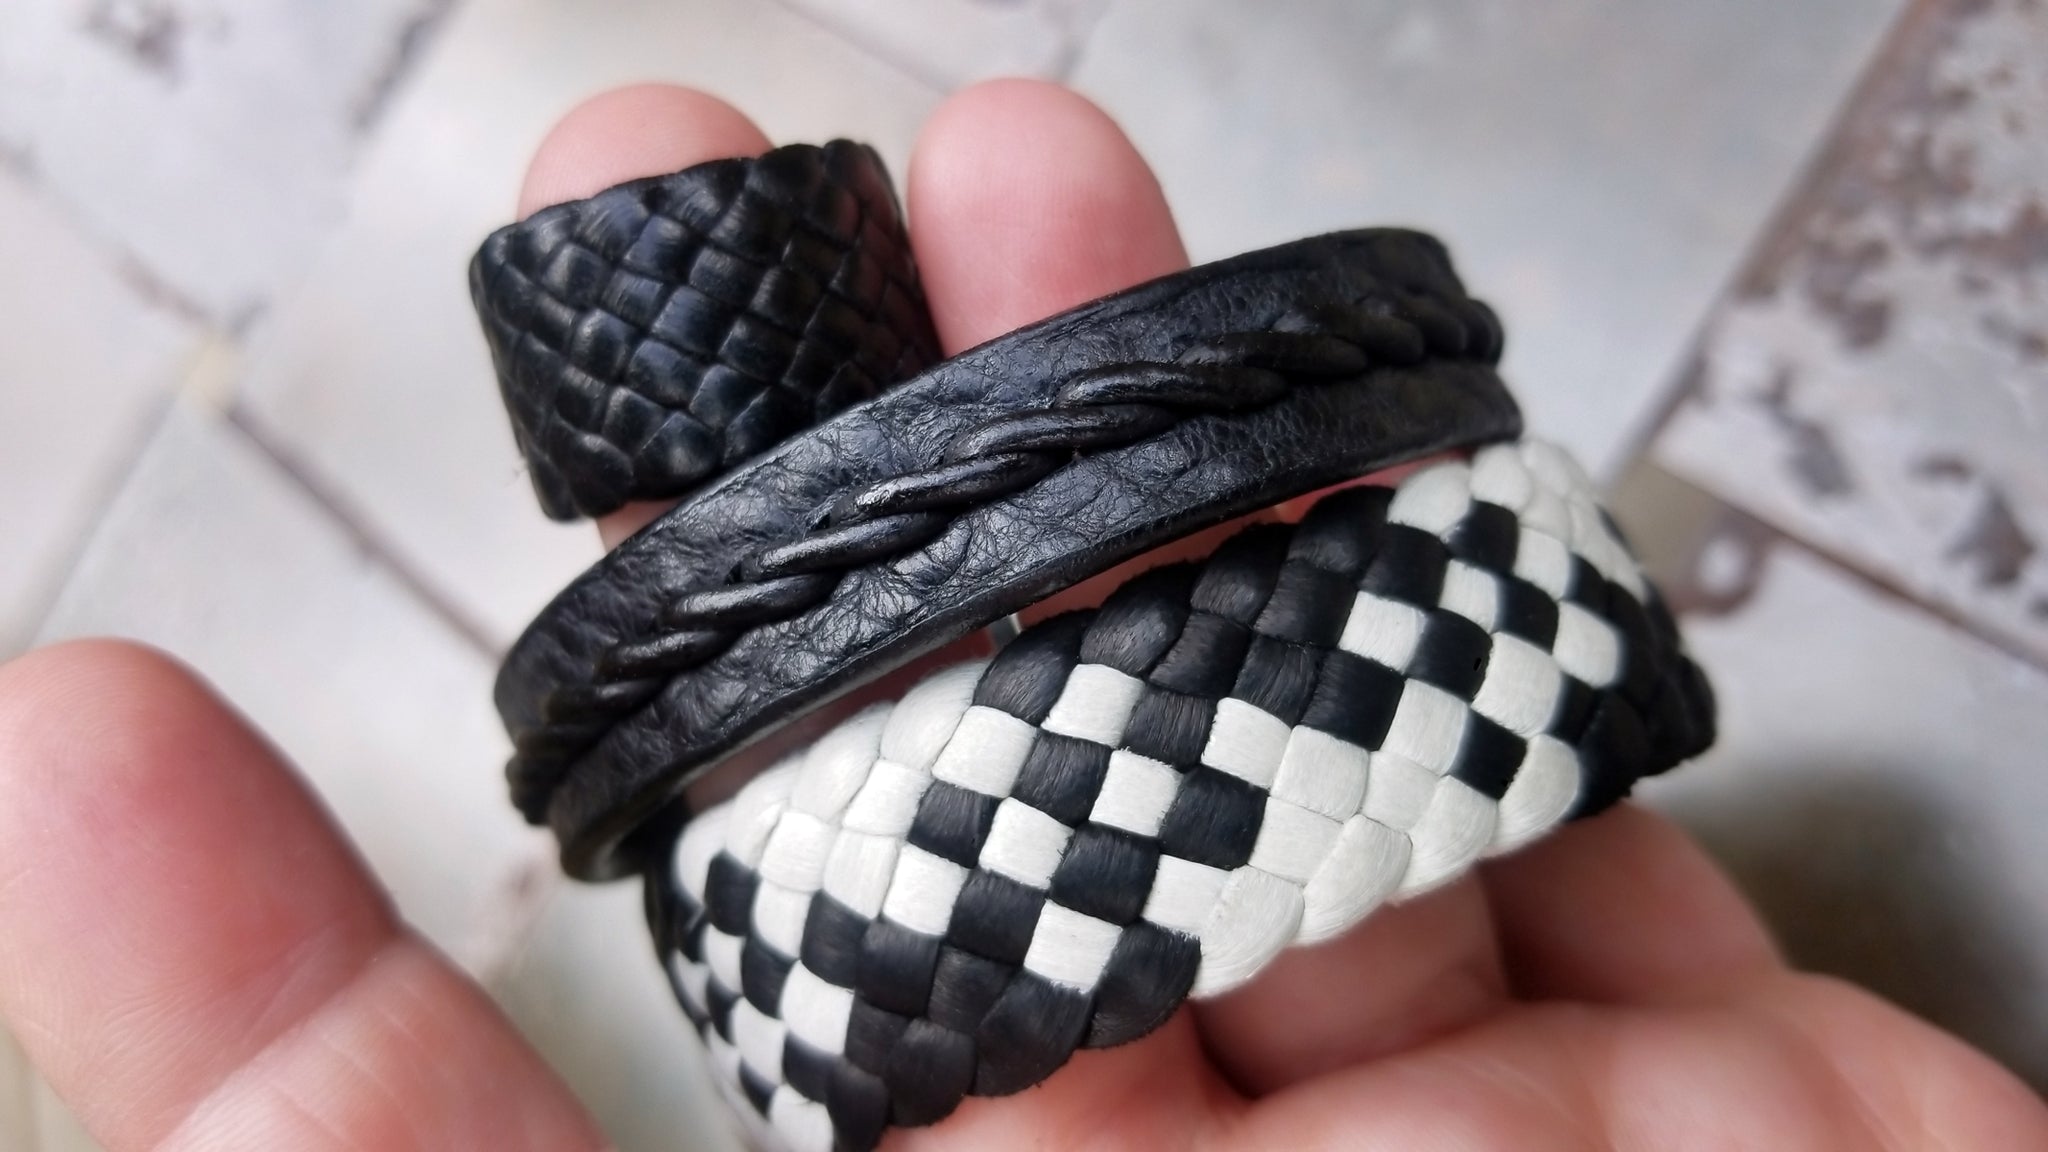 Tyrese Twist Braided Leather Bracelet in Mayo and Black, paired with 3/4" Kama Braided leather Ring (black) and Mayonnaise and Black Amari Braided Leather Bracelet